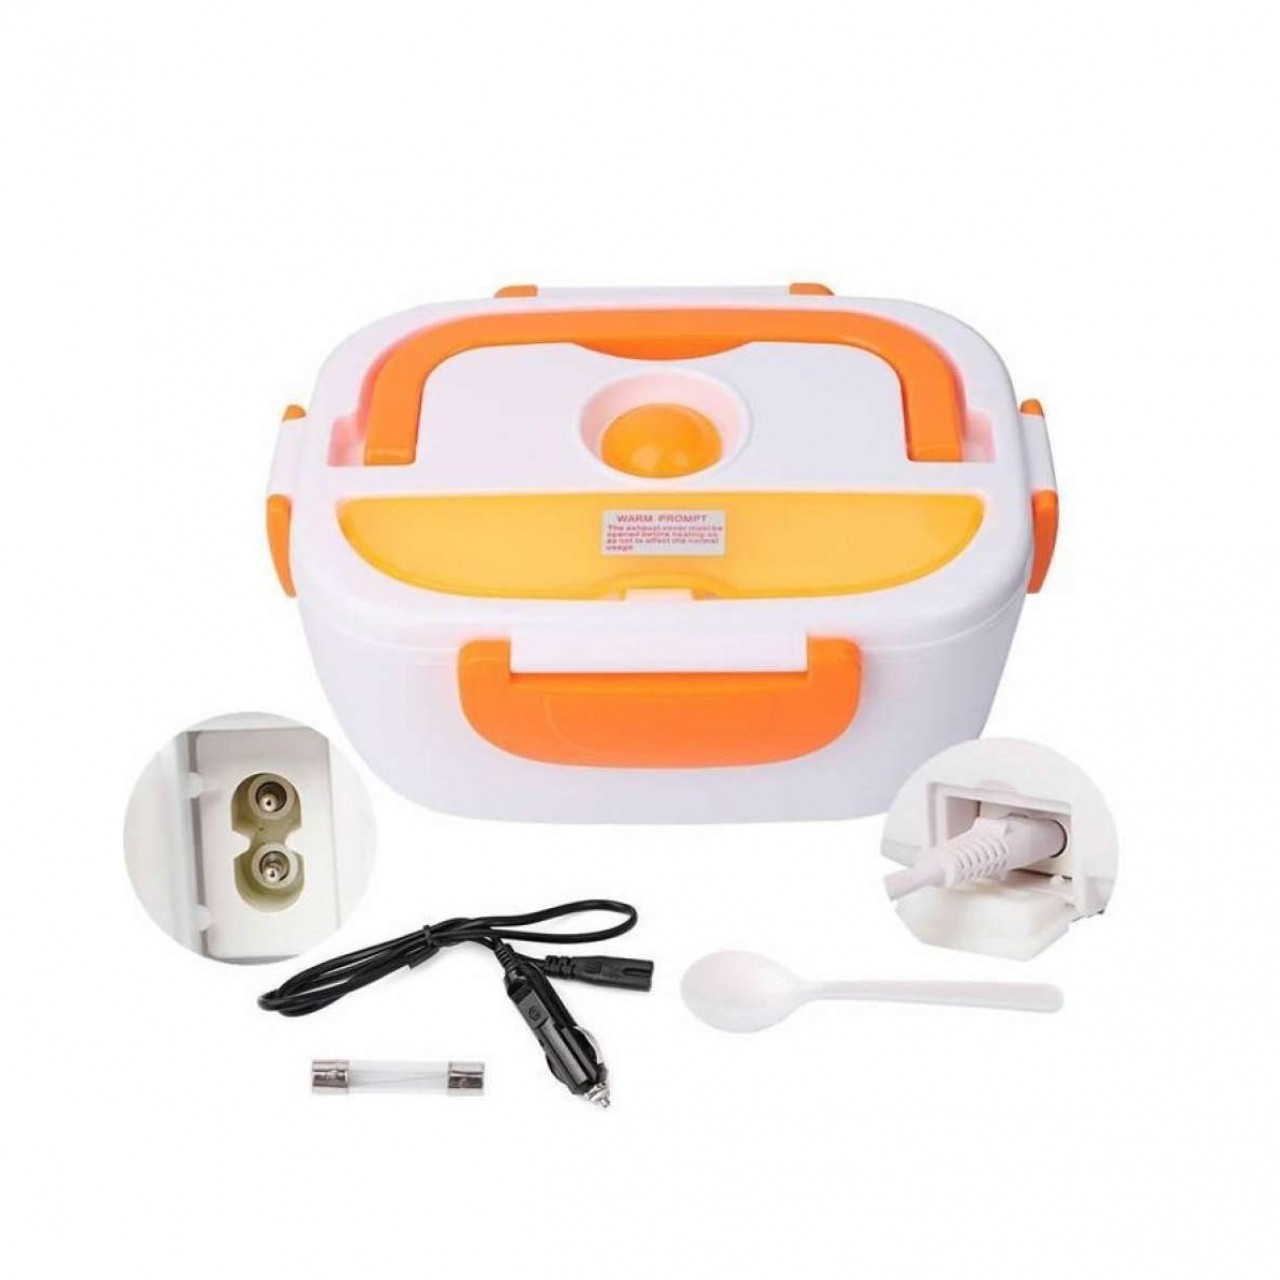 Electric Lunch Box - Multi function Portable Electric Heating Lunch Box - Orange